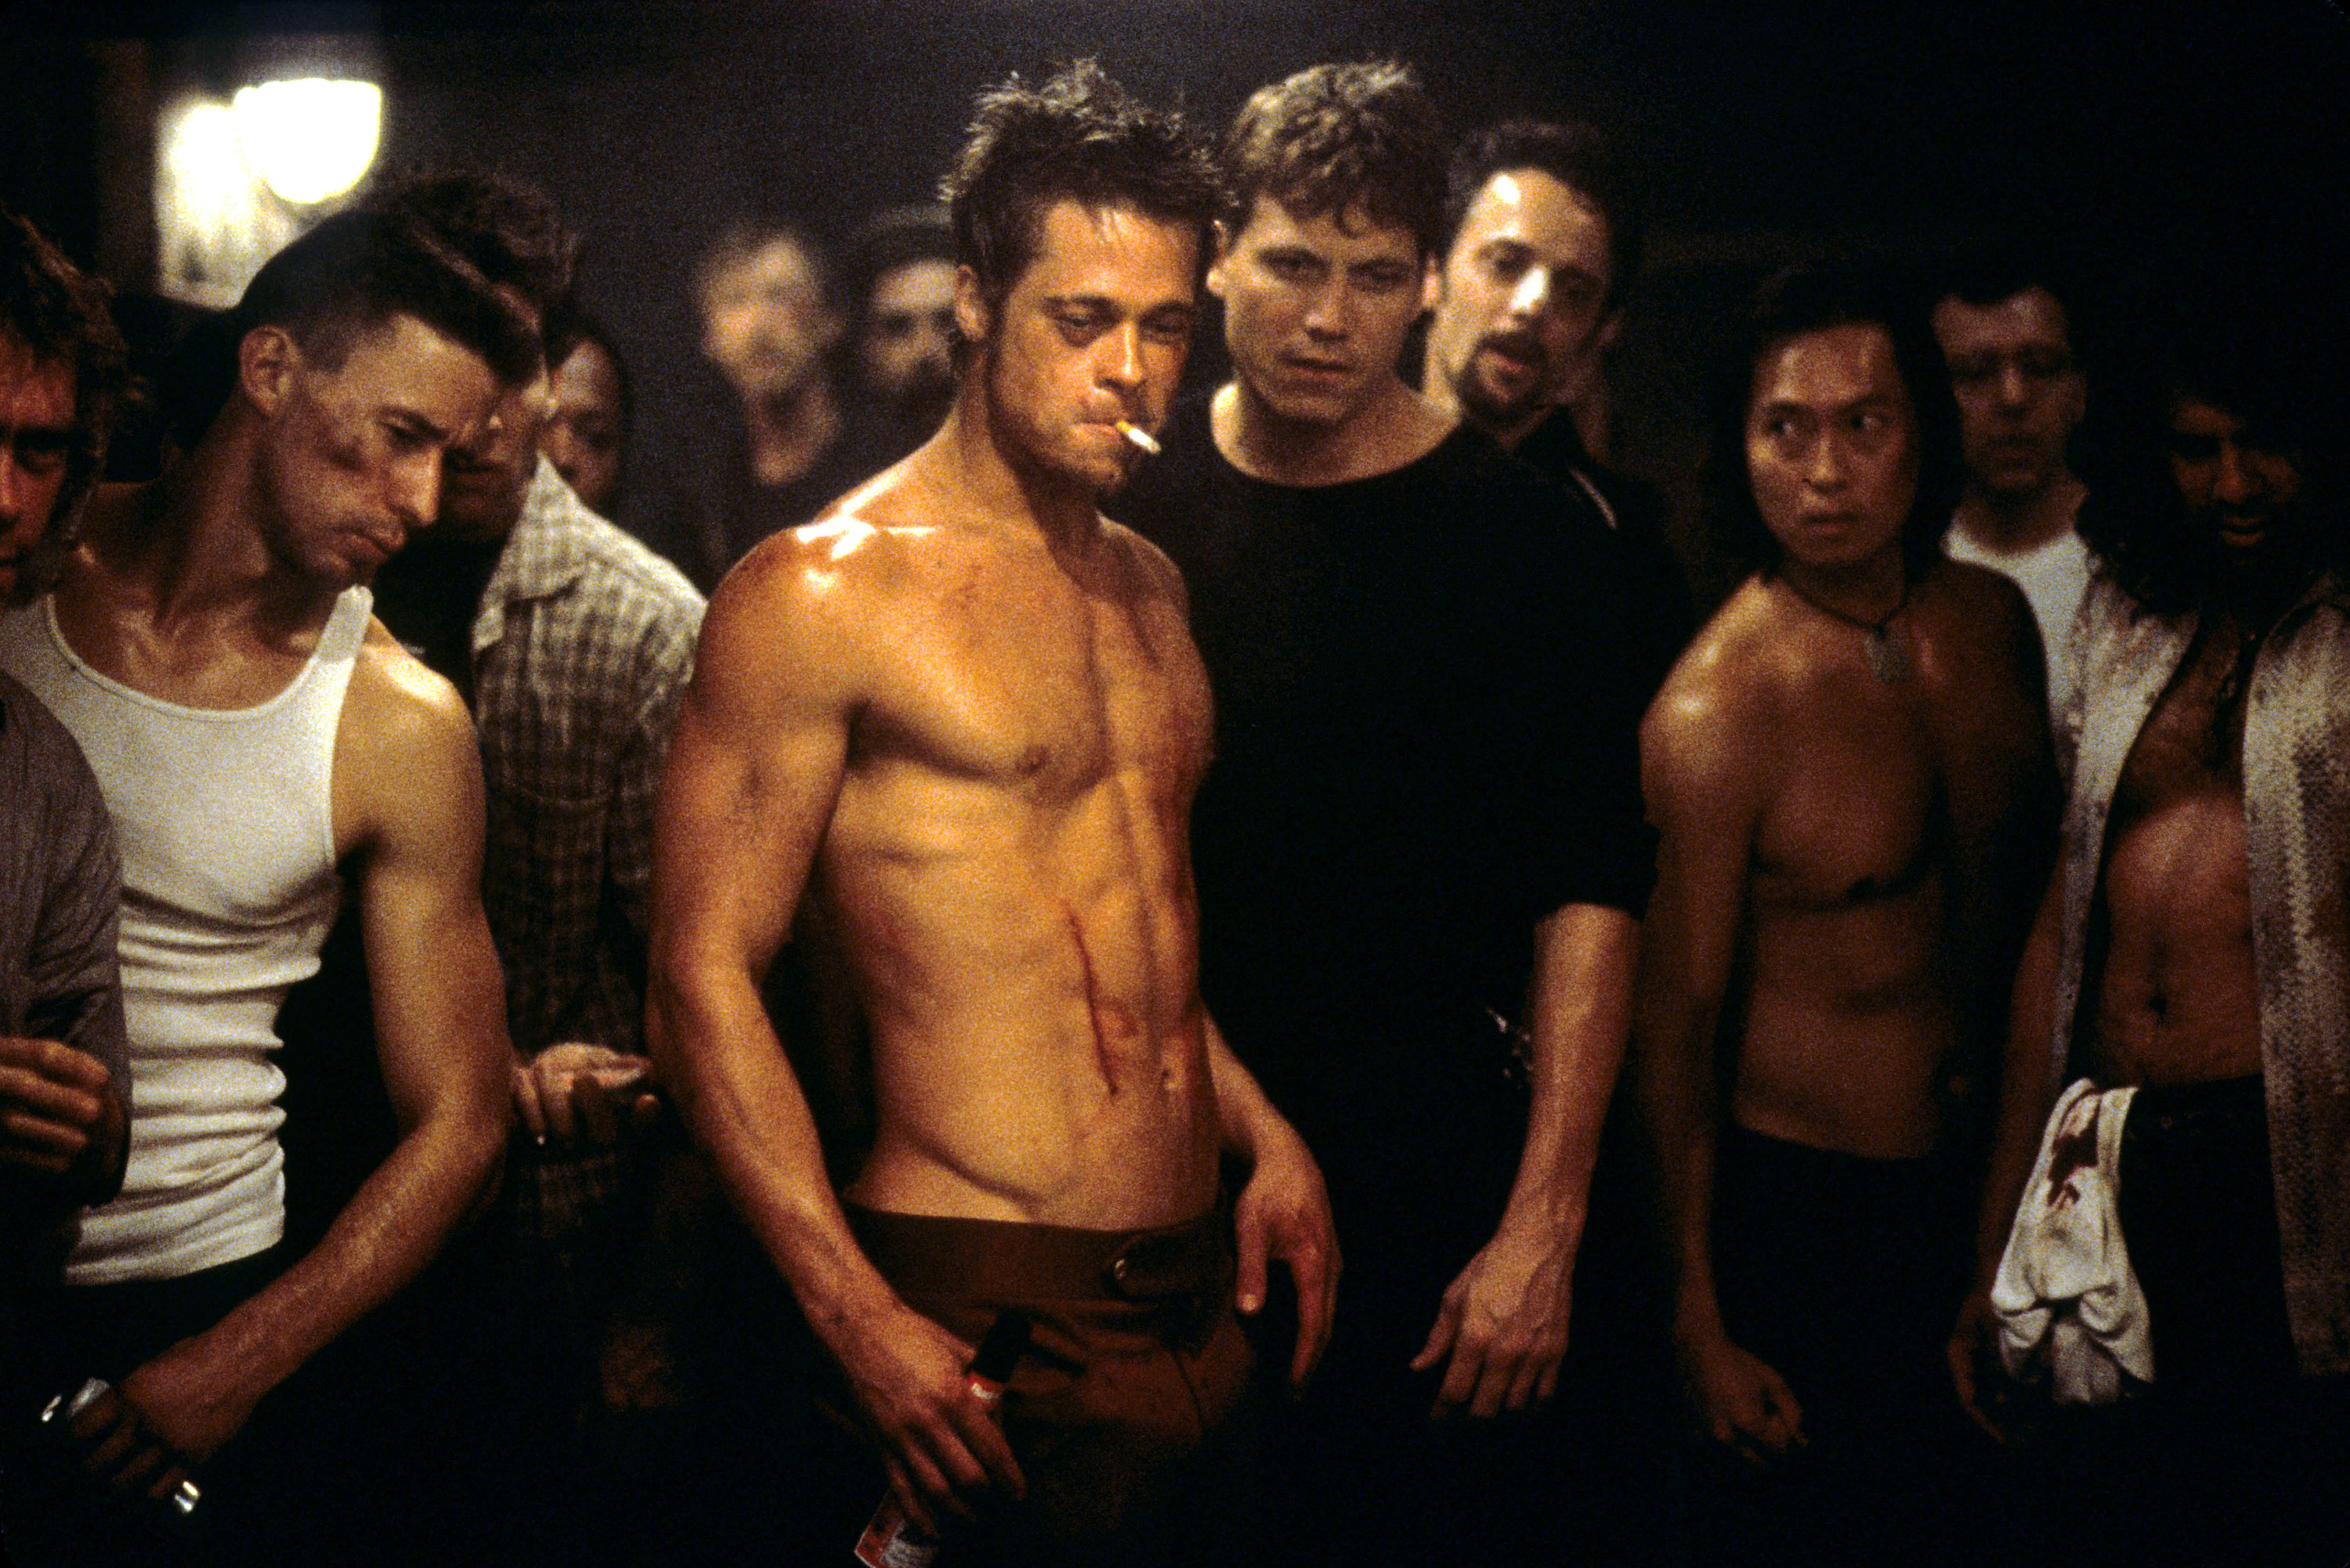 A beaten-up Brad Pitt among a crowd in &quot;Fight Club&quot;